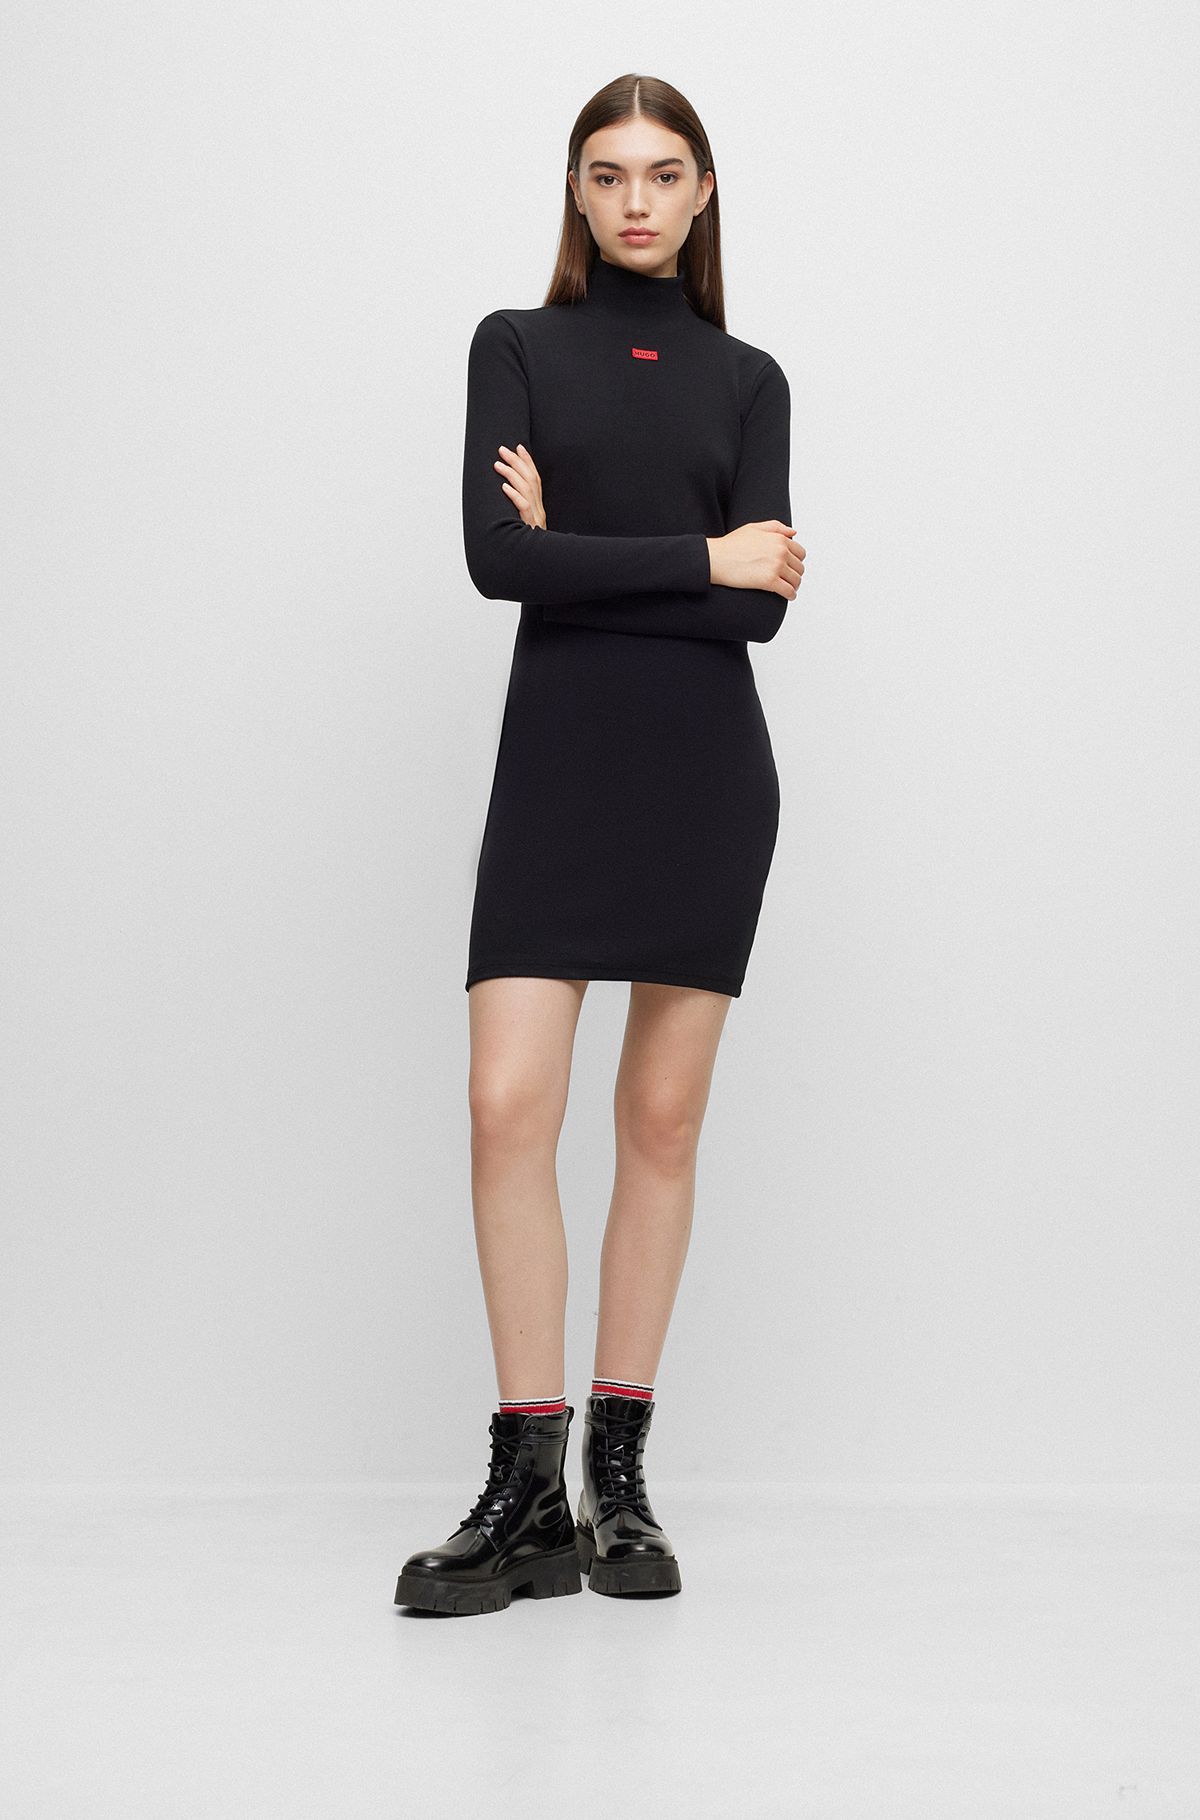 Long-sleeved dress with red logo label, Black